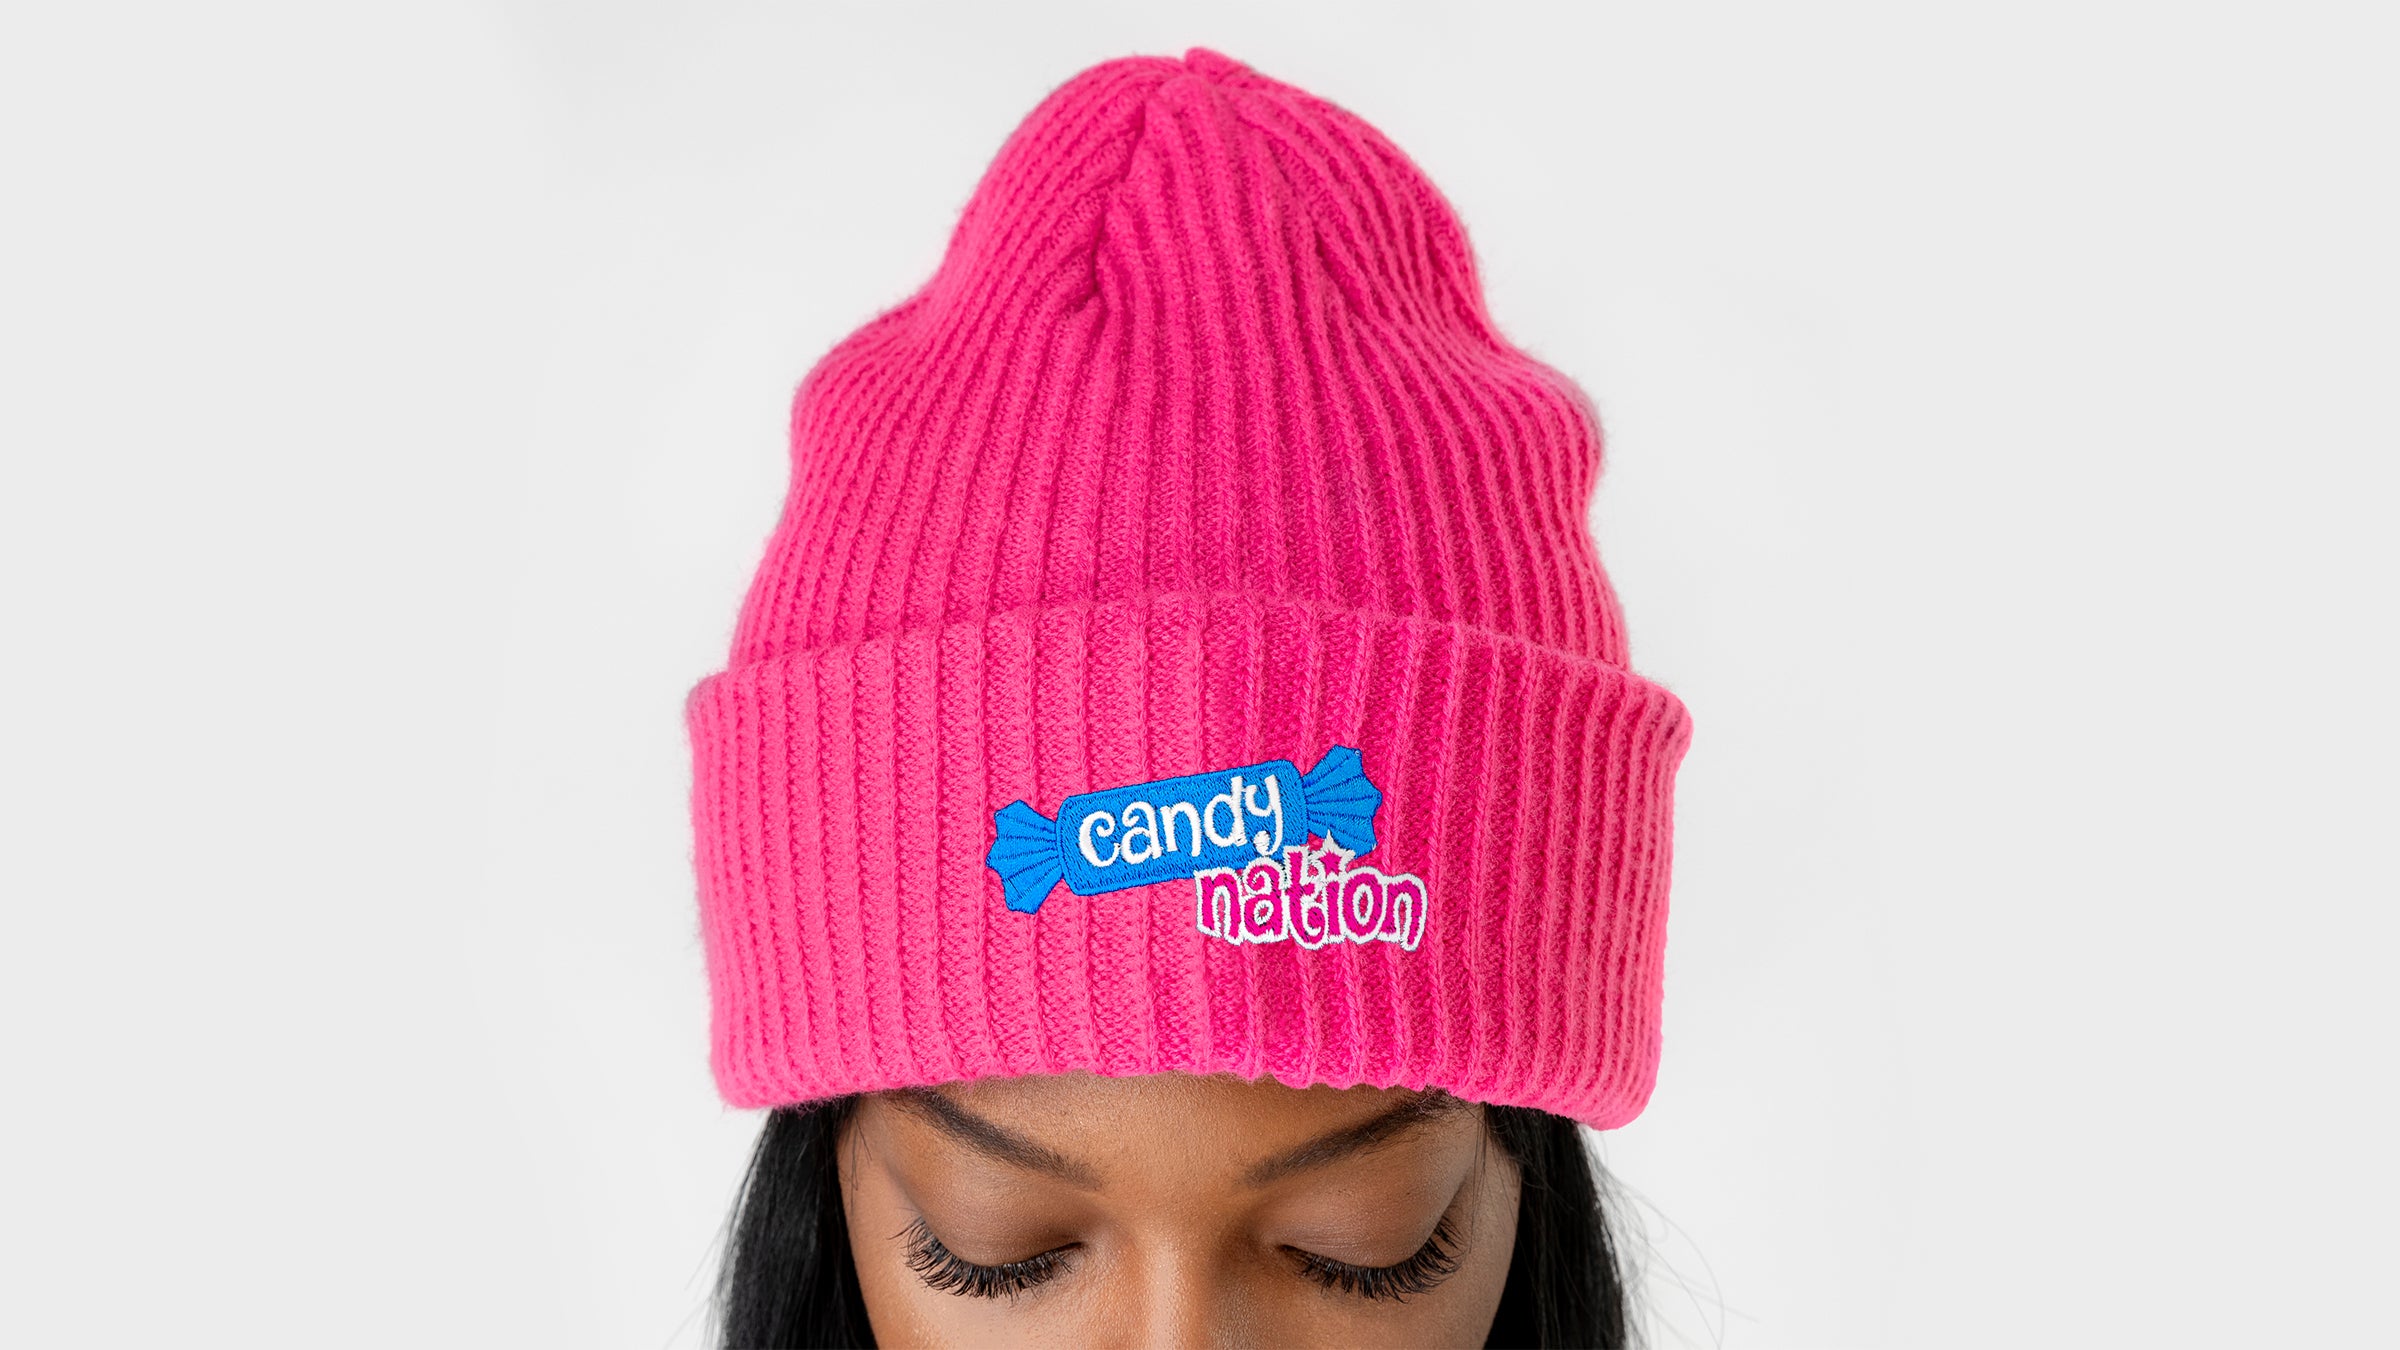 Custom Embroidered Beanies, Business Beanies